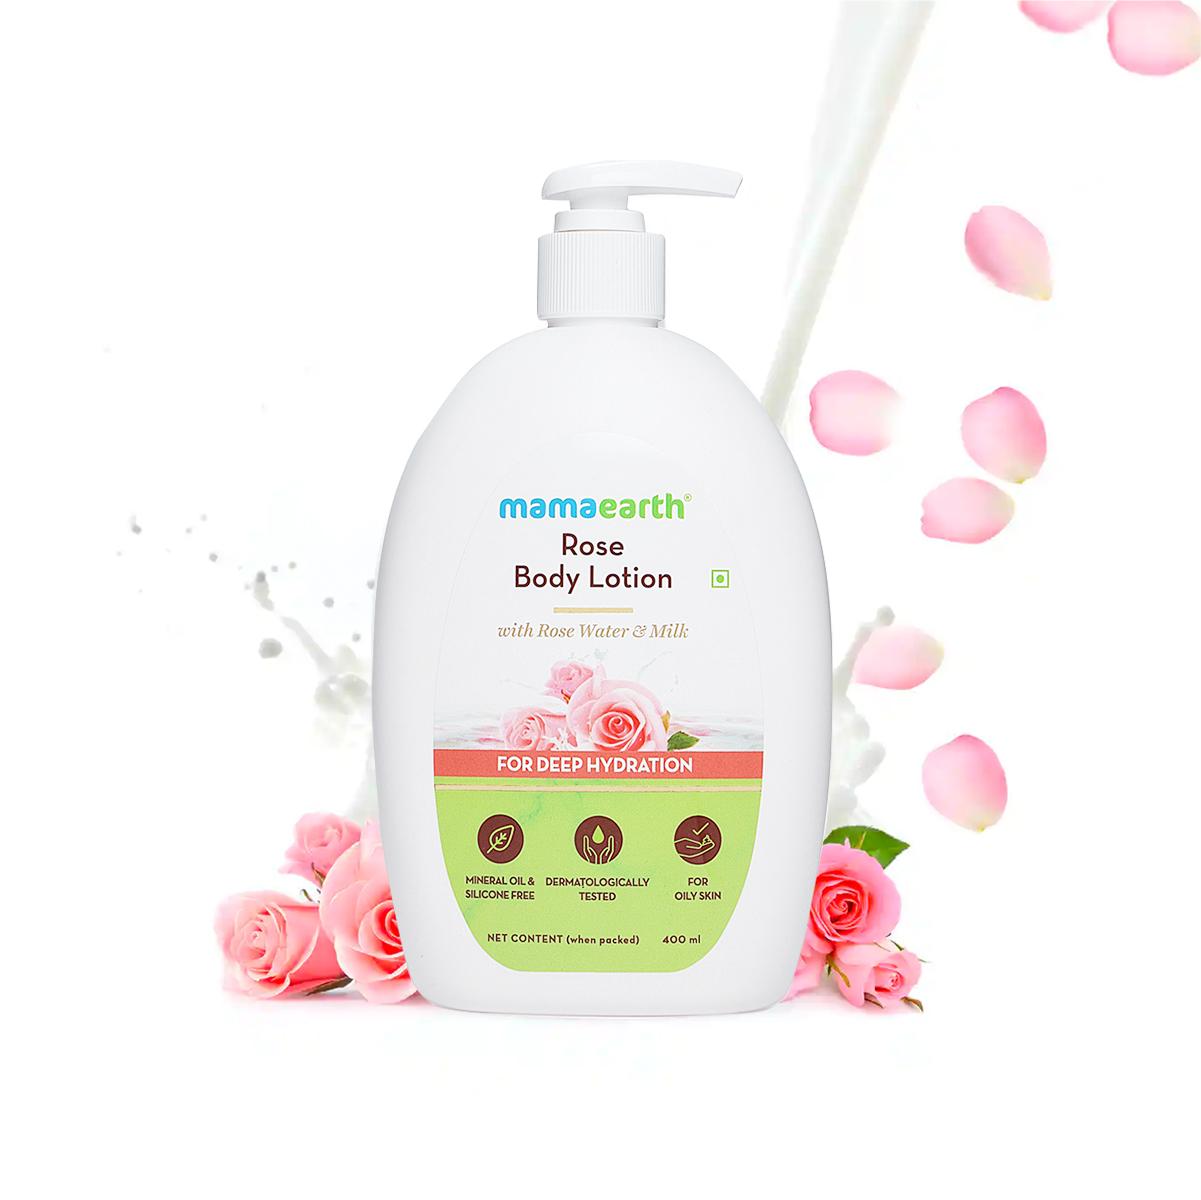 rose body lotion with rose water and milk for deep hydration - 400ml